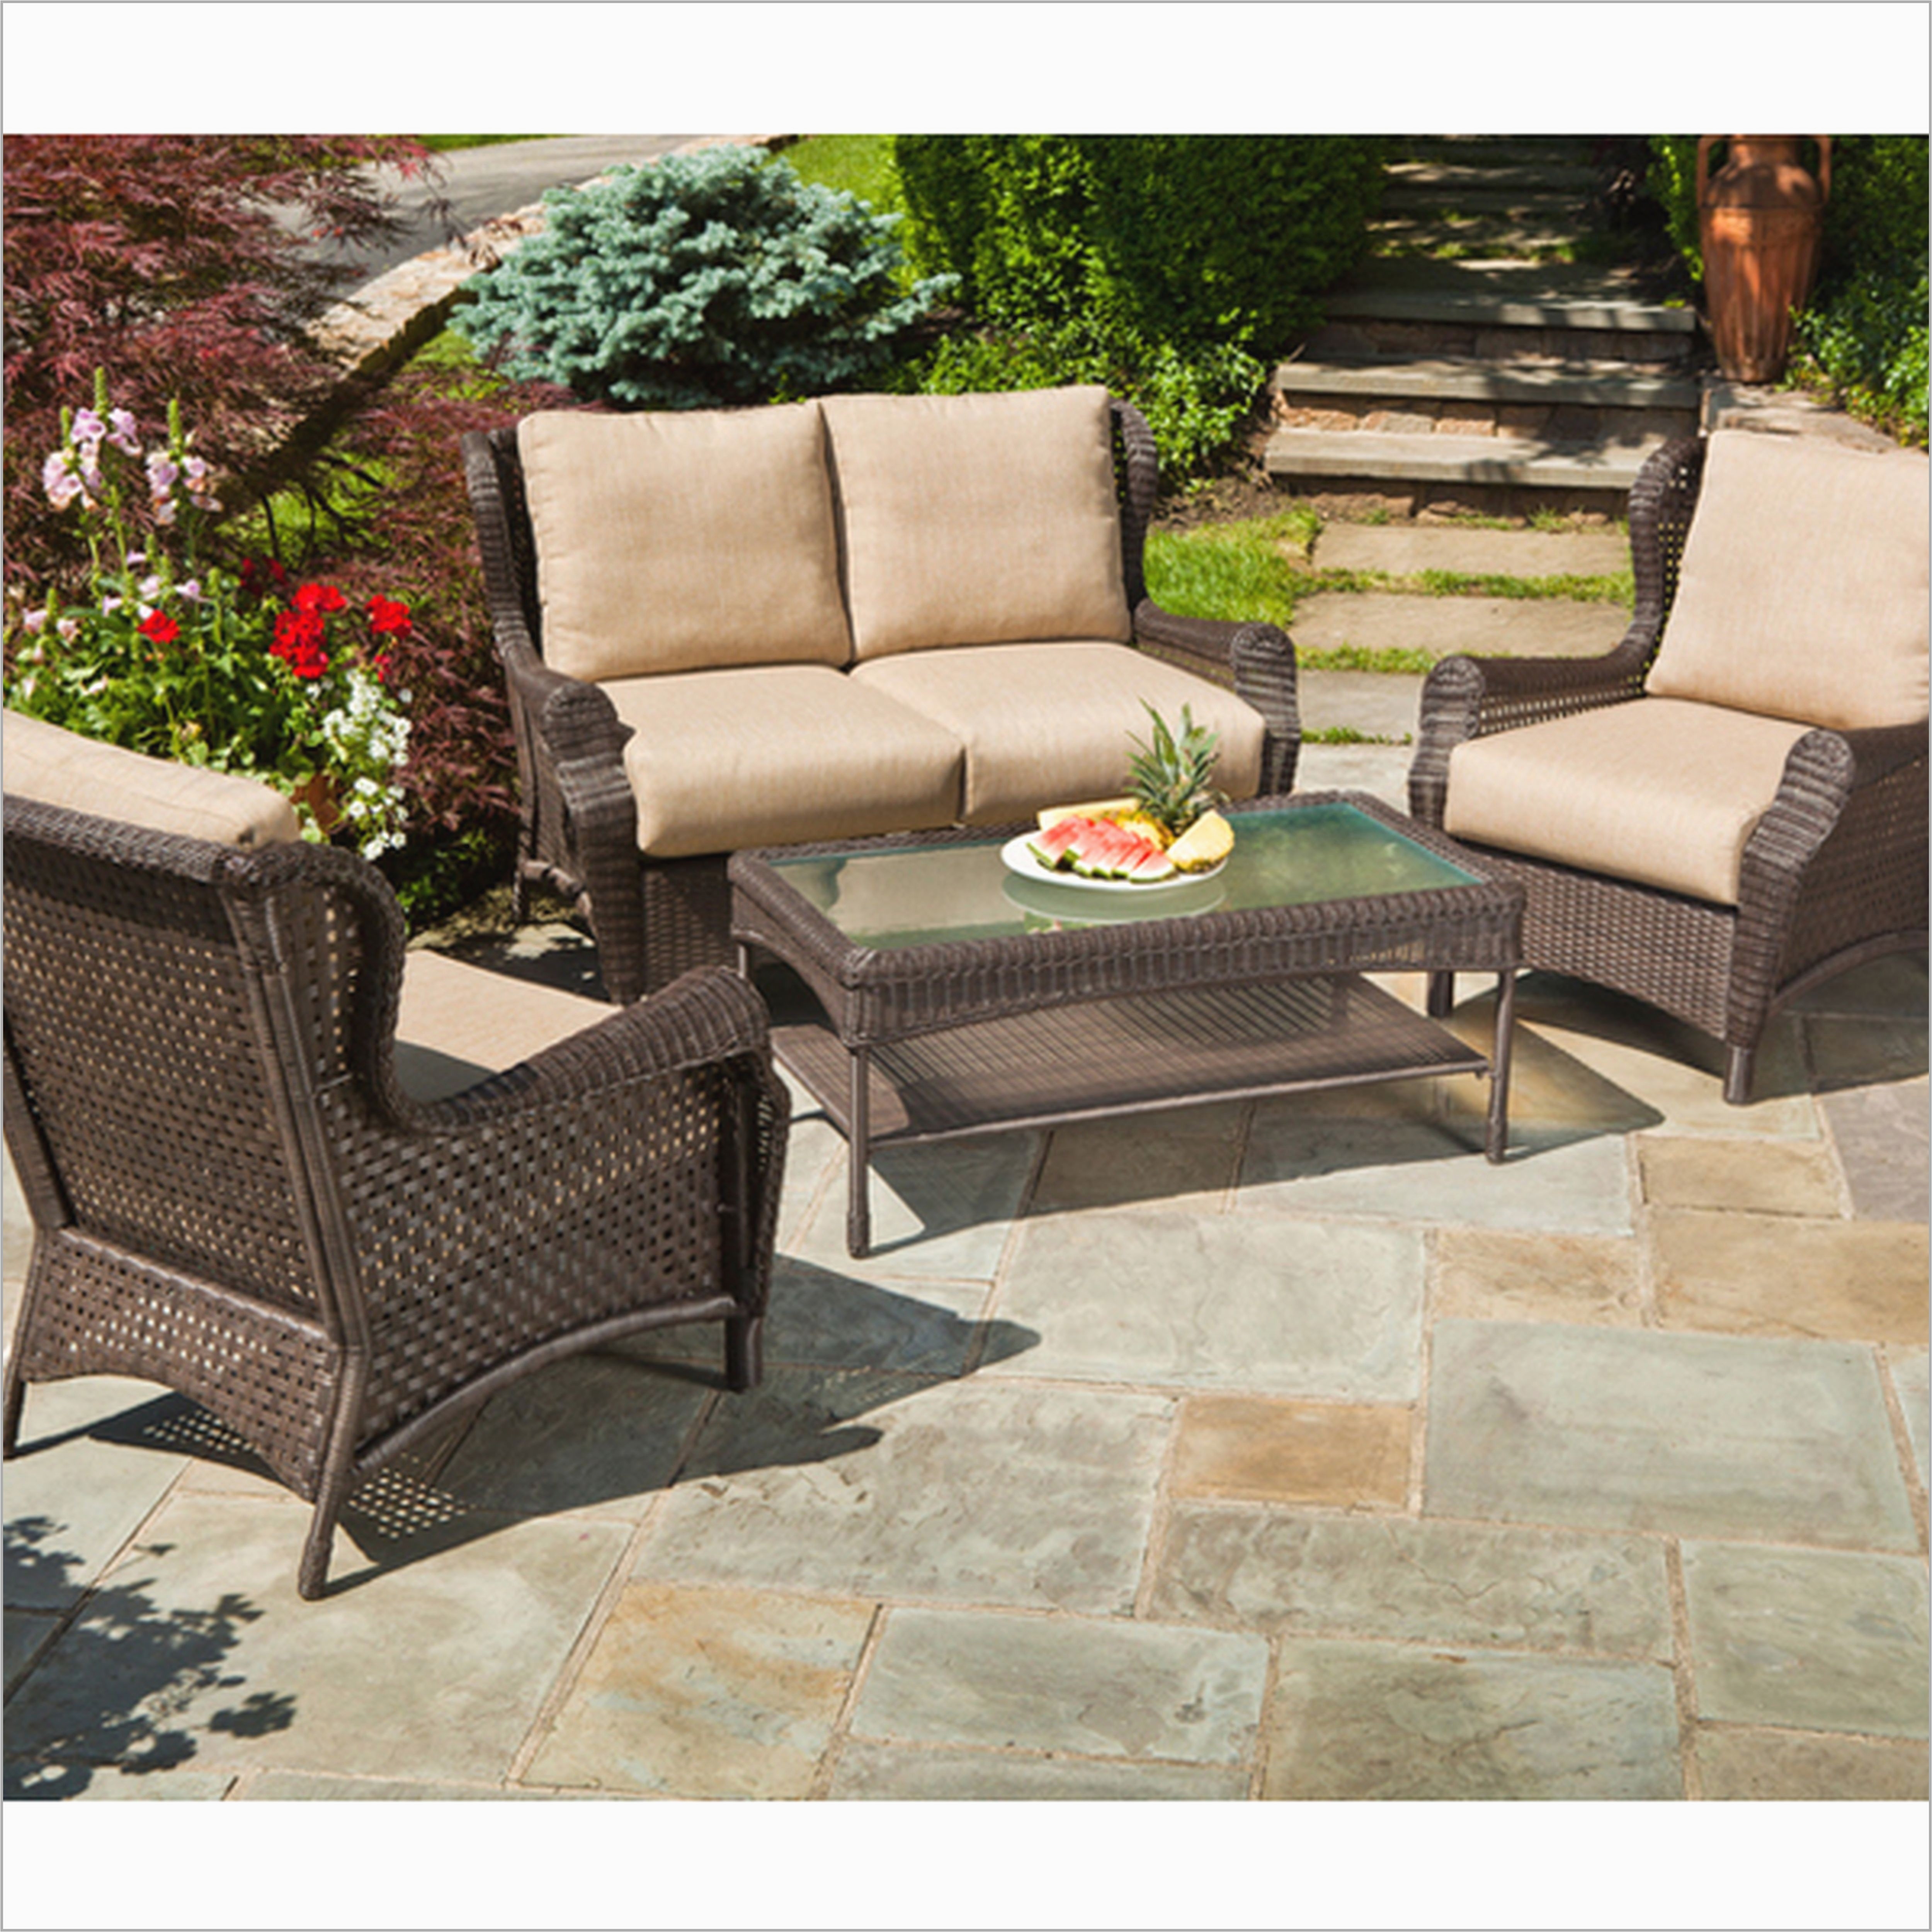 patio furniture cover best wicker outdoor sofa 0d patio chairs design ideas outdoor patio table